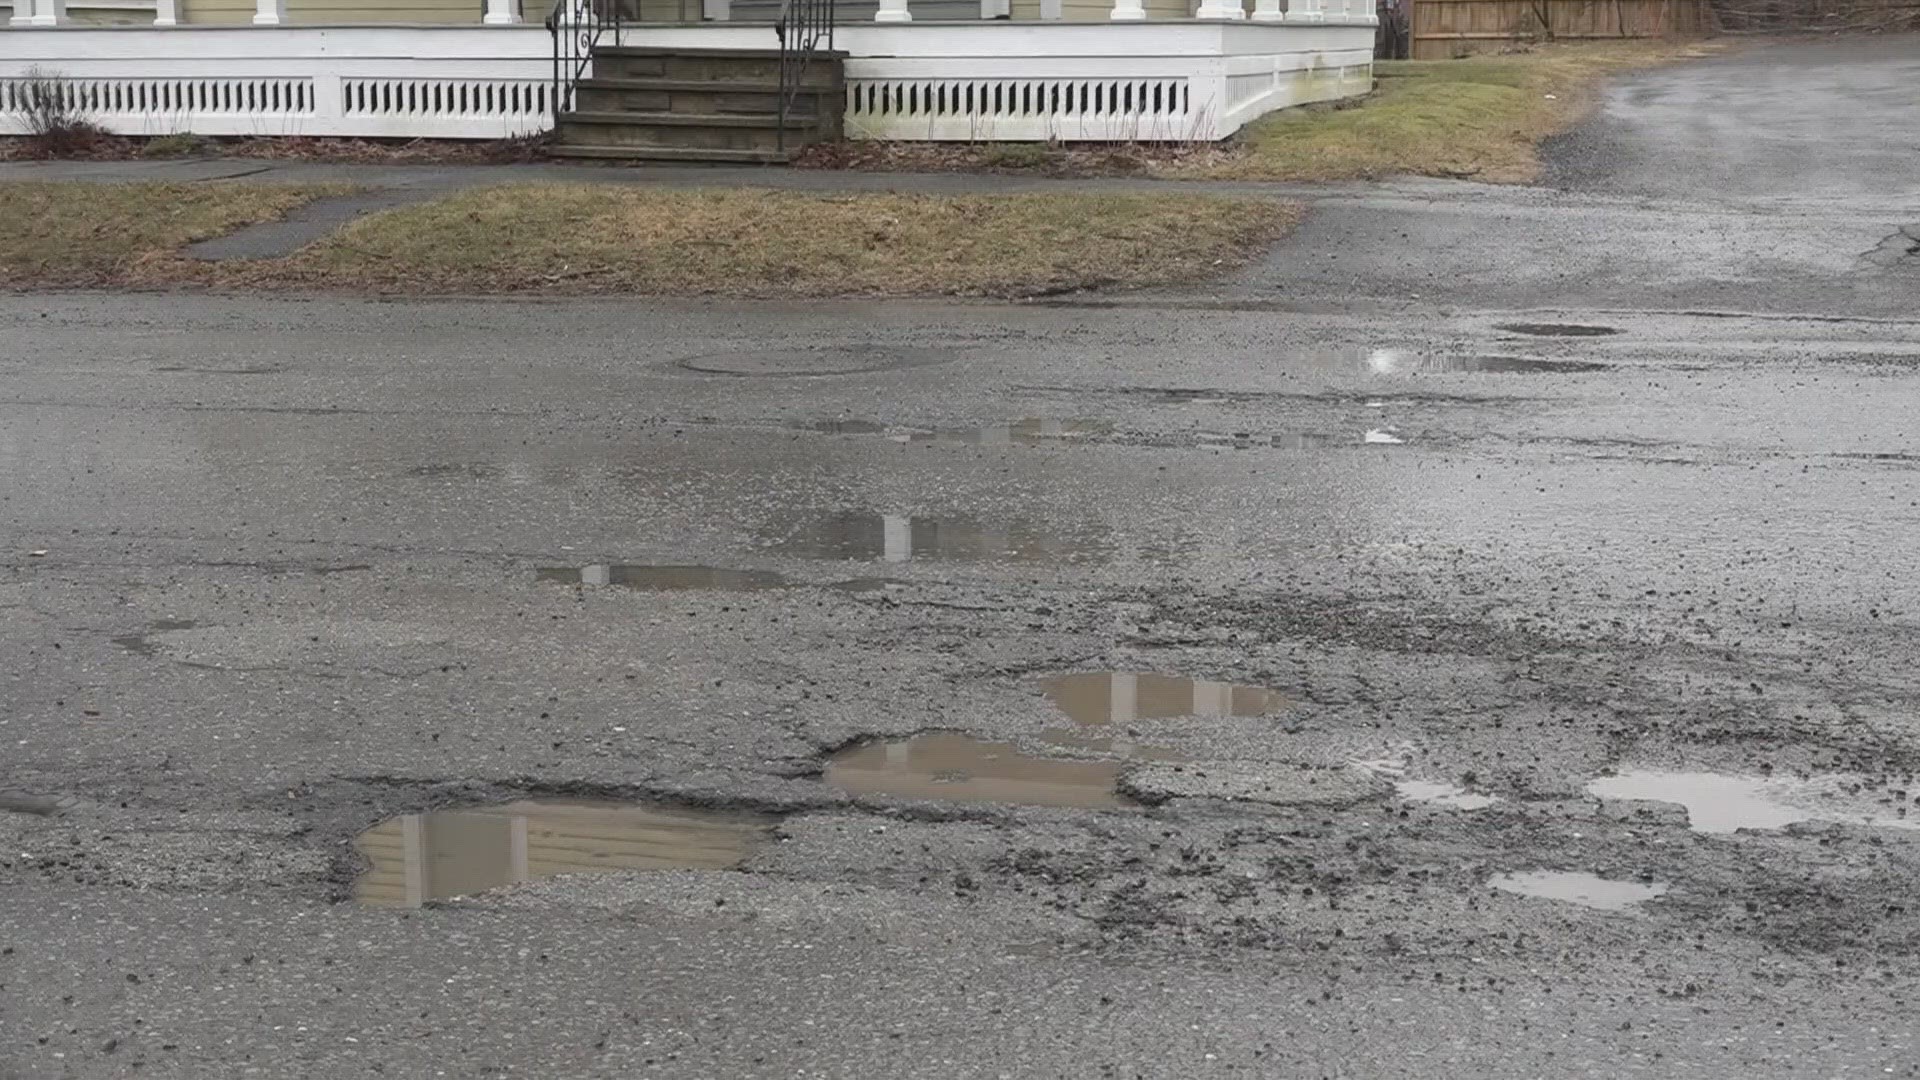 Bangor Public Works said the streets are worn down by daily traffic, precipitation, and fluctuating temperatures, causing potholes.